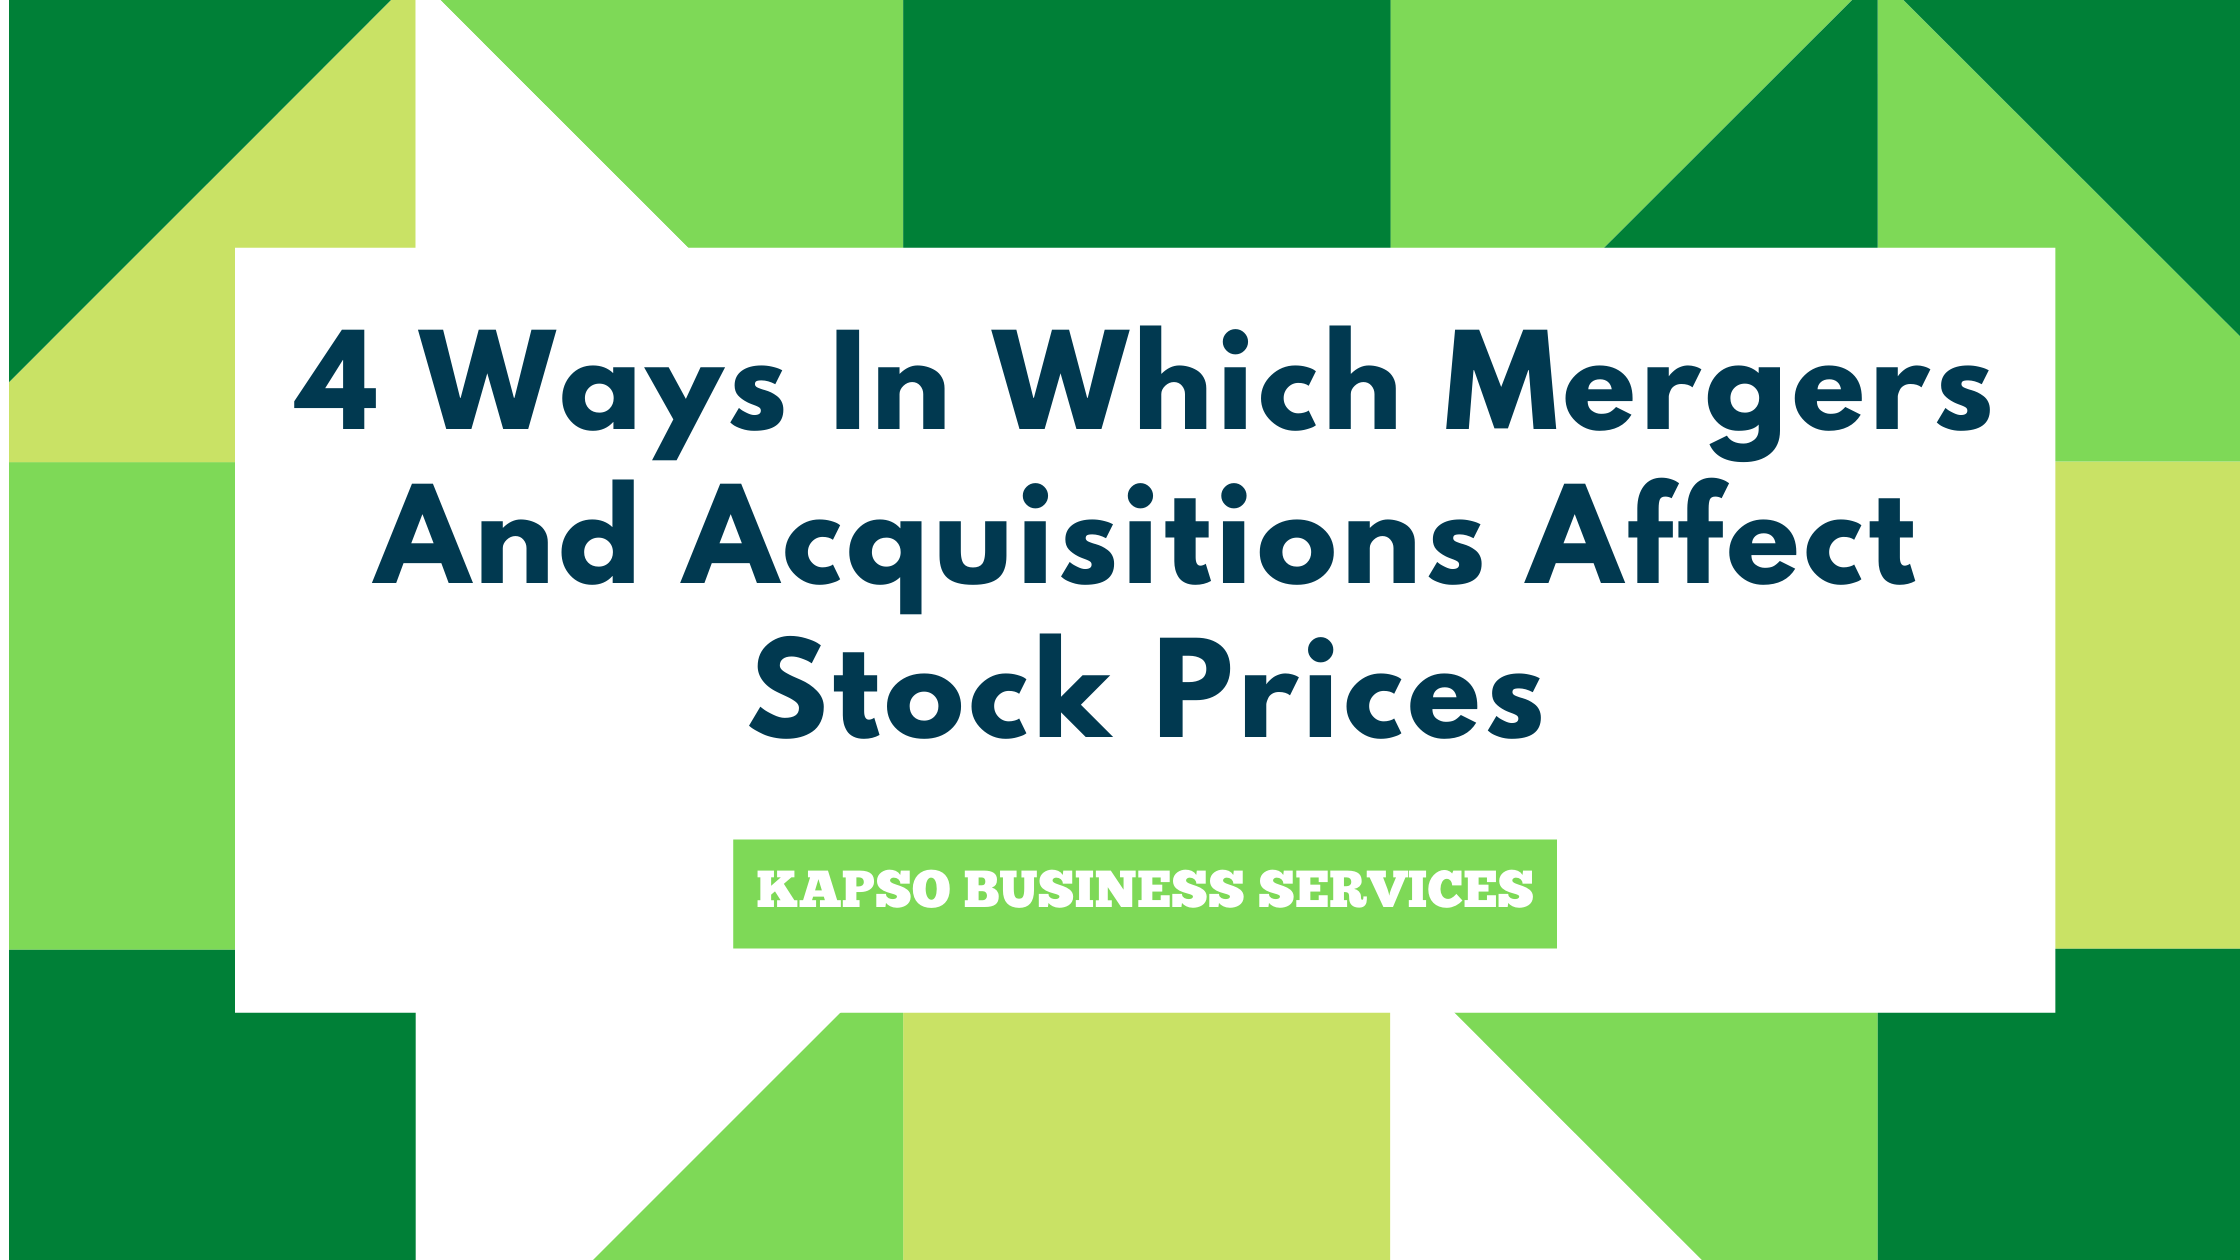 4 Ways Which Mergers and Acquisitions Affect Stock Prices